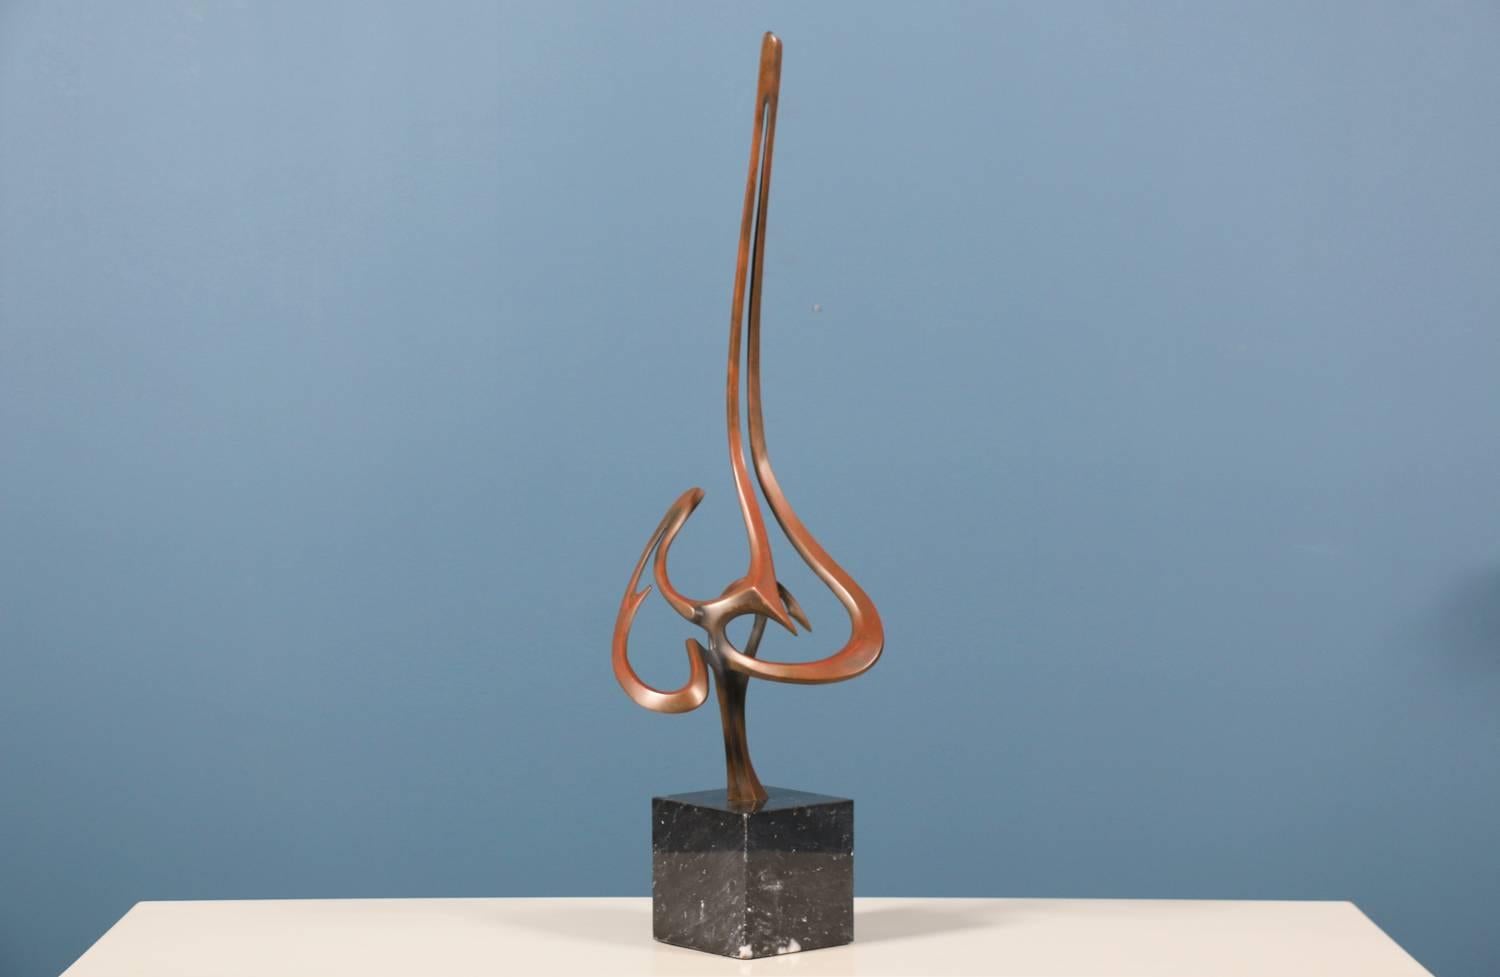 Mid Century modern sculpture designed by Bob and Tom Bennett and manufactured by Bob Bennett in the United States circa 1980’s. This abstract design features a tall bronze body with sharp and pointed edges on a marble base. The sculpture shows a